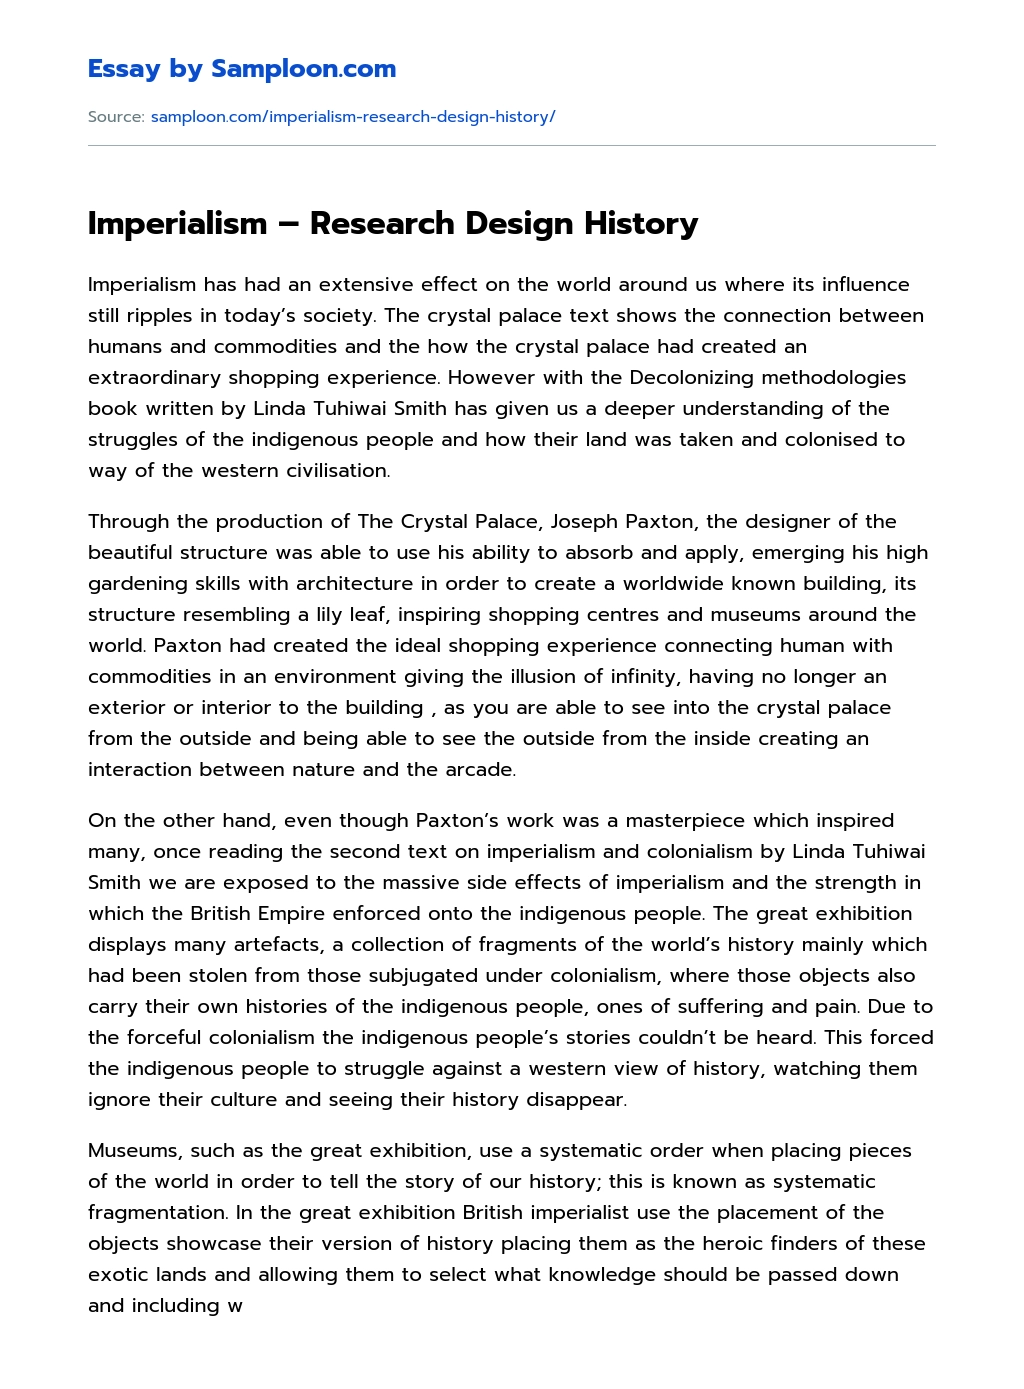 Imperialism – Research Design History essay